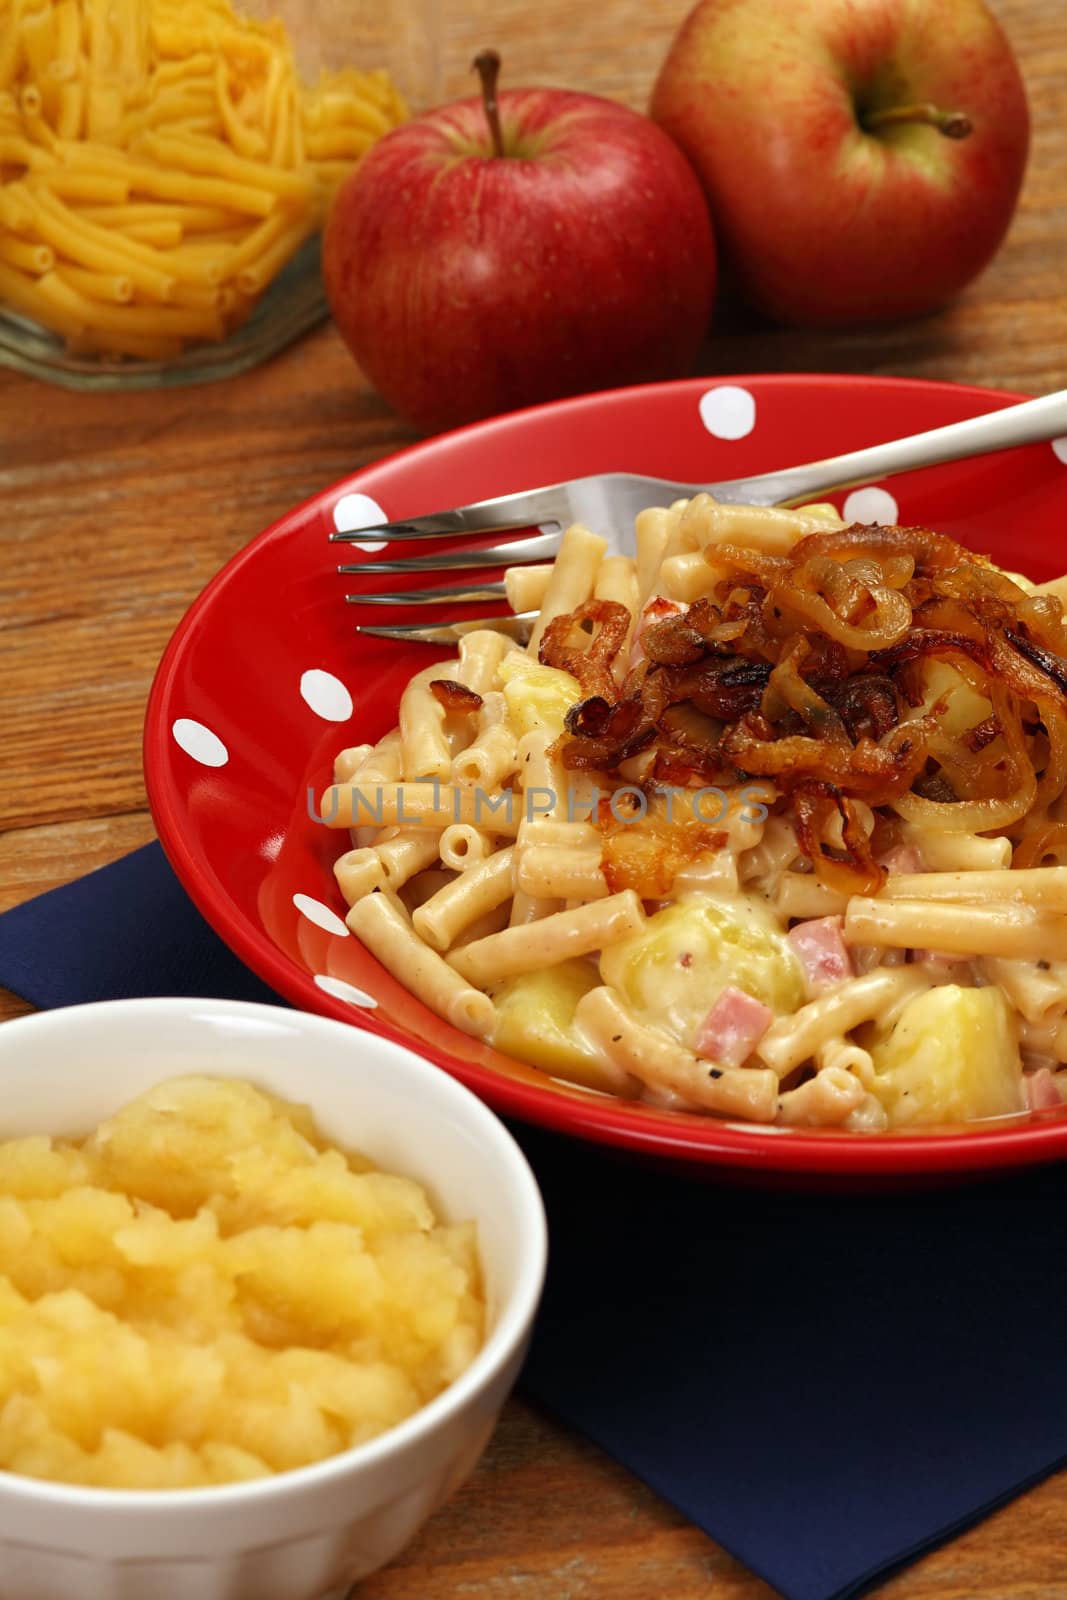 Photo of a bowl of Alplermagronen, or Alpine farmer's macaroni, a traditional Swiss meal made with noodles, potatoes, cheese, onions and served with applesauce.